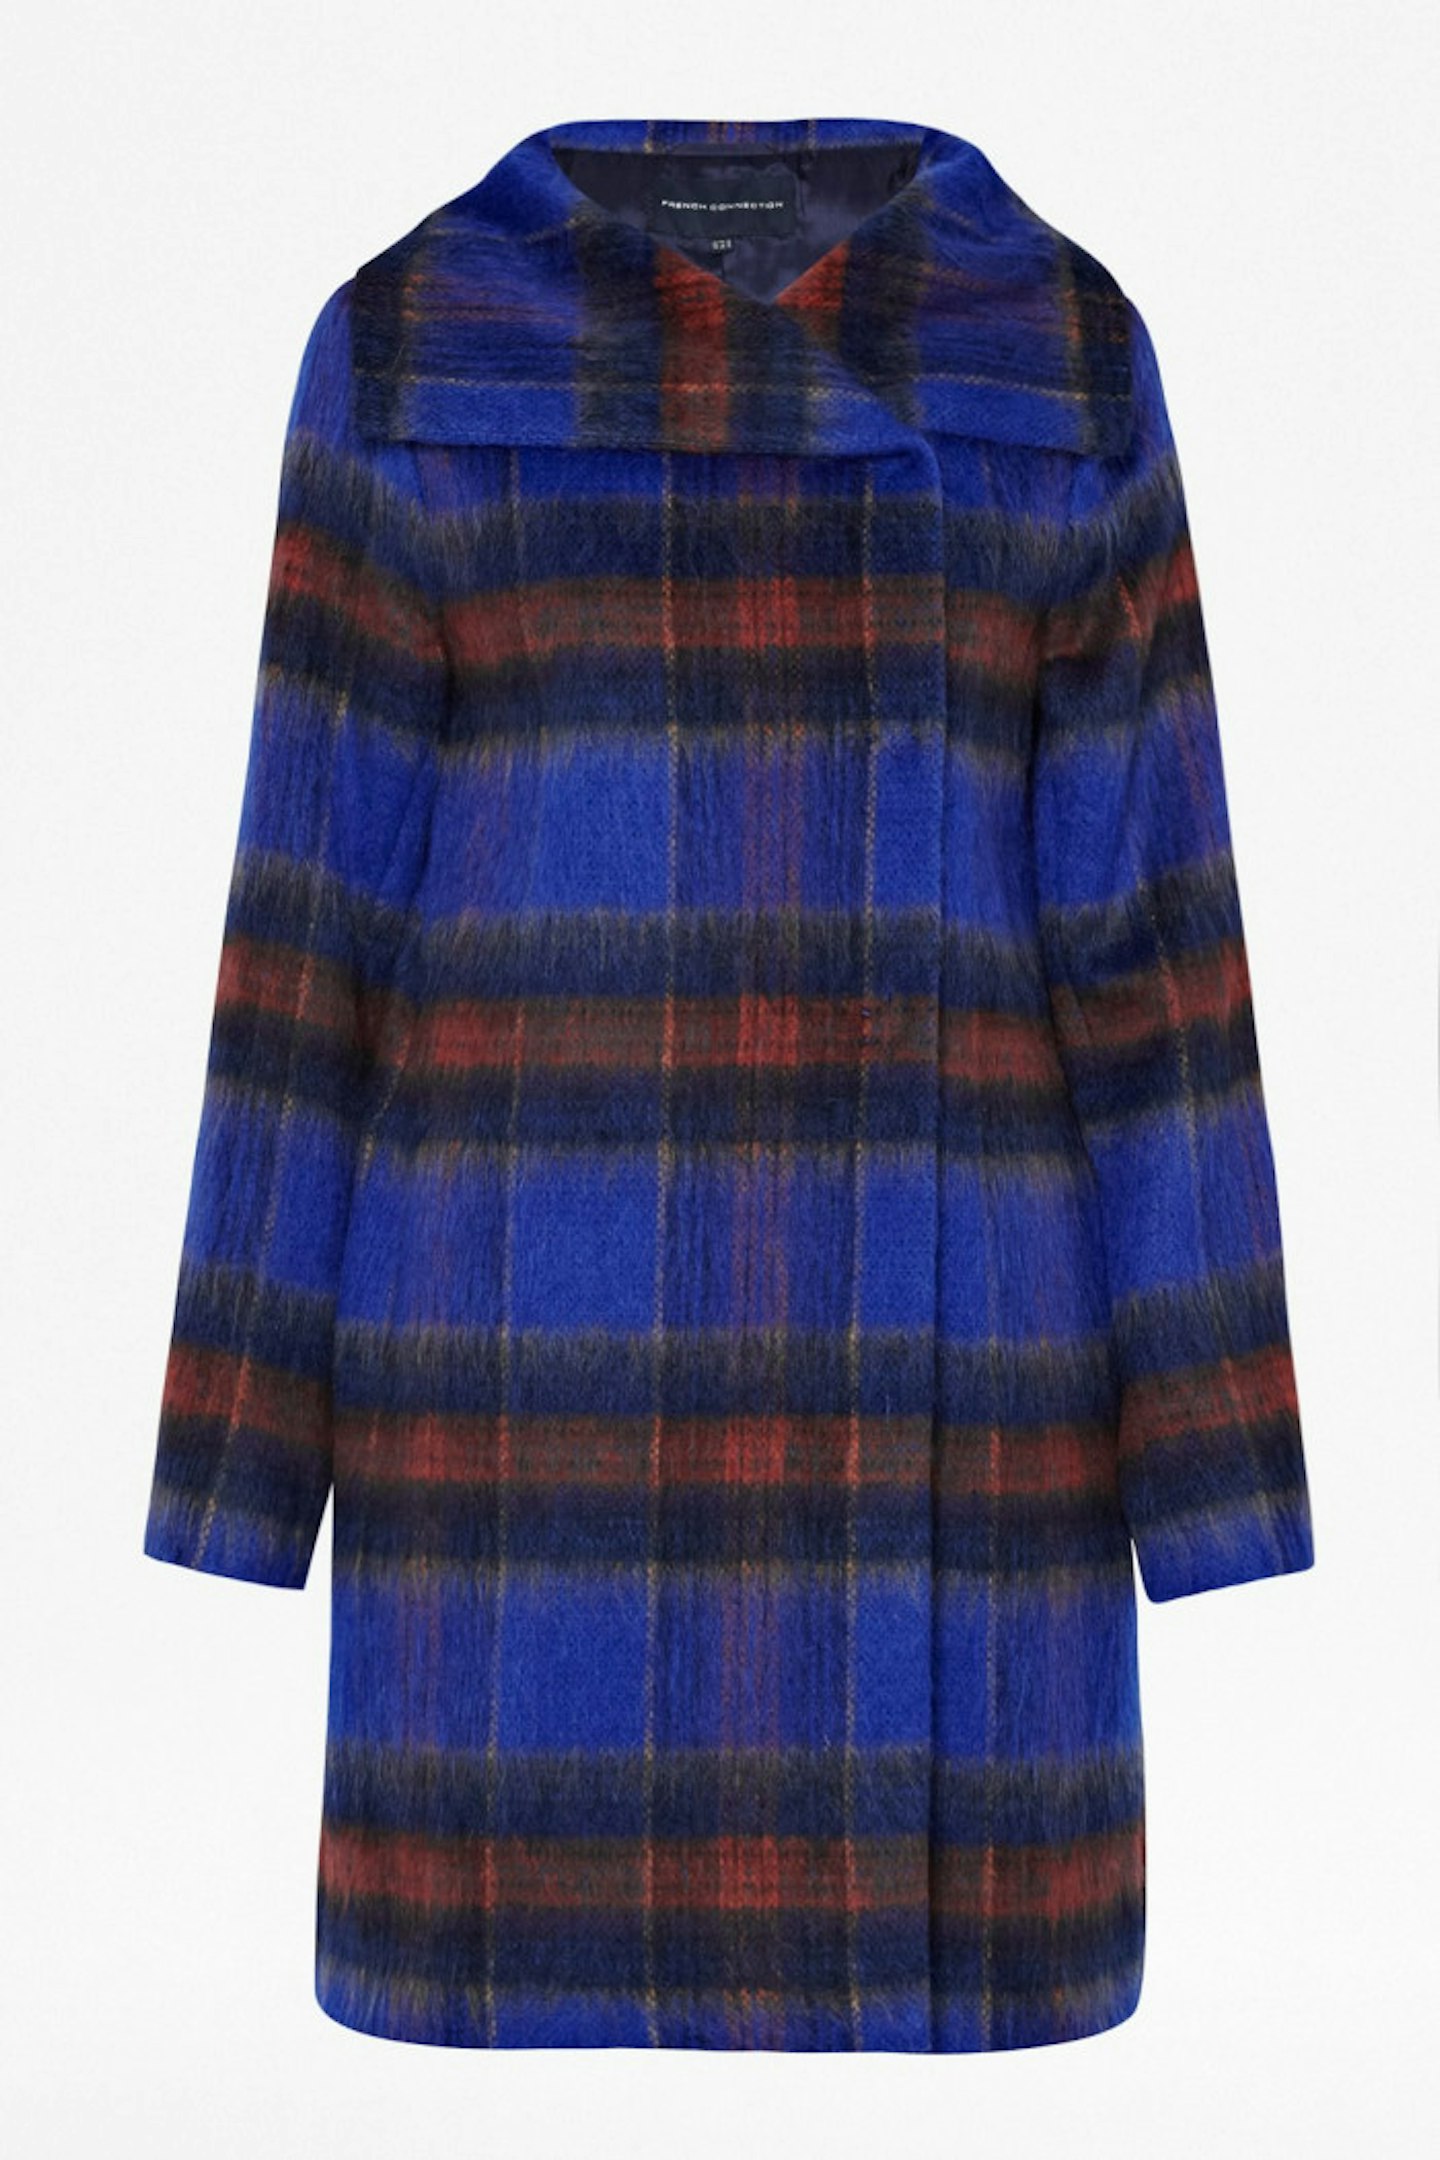 We'll never get over plaid, and this blue coat will be a great way to rock the trend this Autumn.